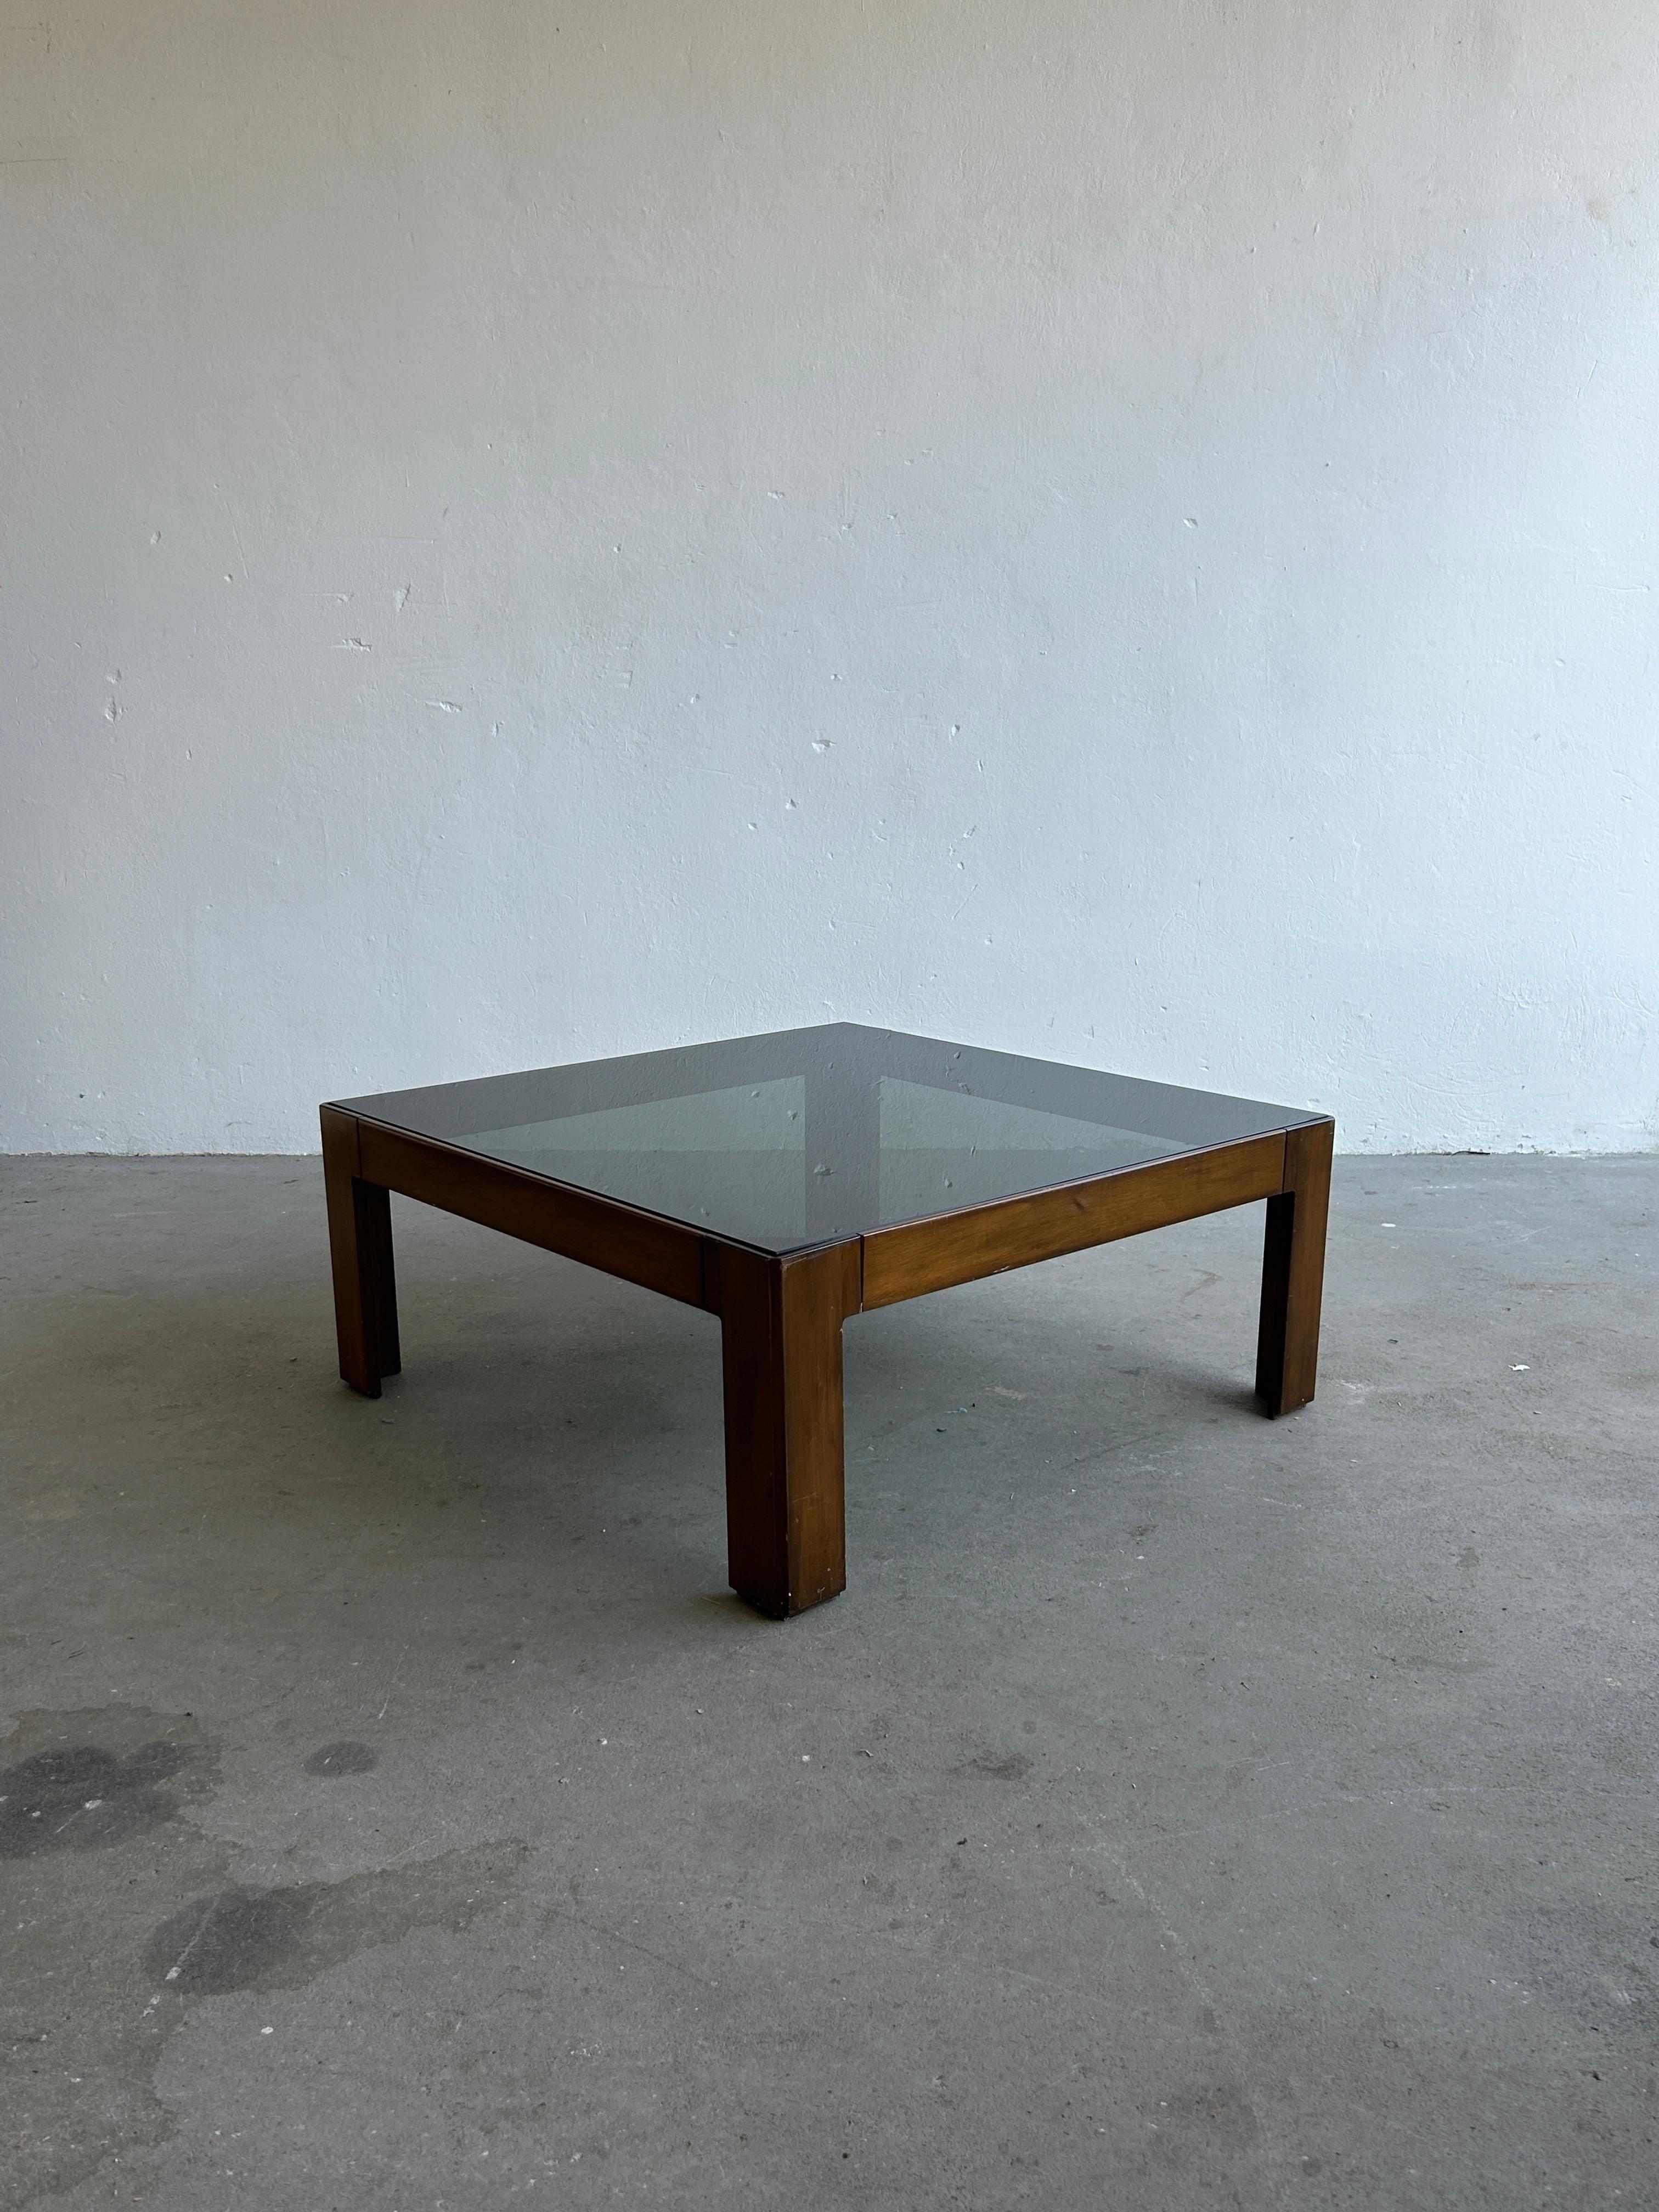 A beautiful and elegant, Italian Mid-Century Modern coffee table or club table, following the style and sculpturality in design of Afra and Tobia Scarpa.
Large and low, a perfect central or side piece of any midcentury or modernist